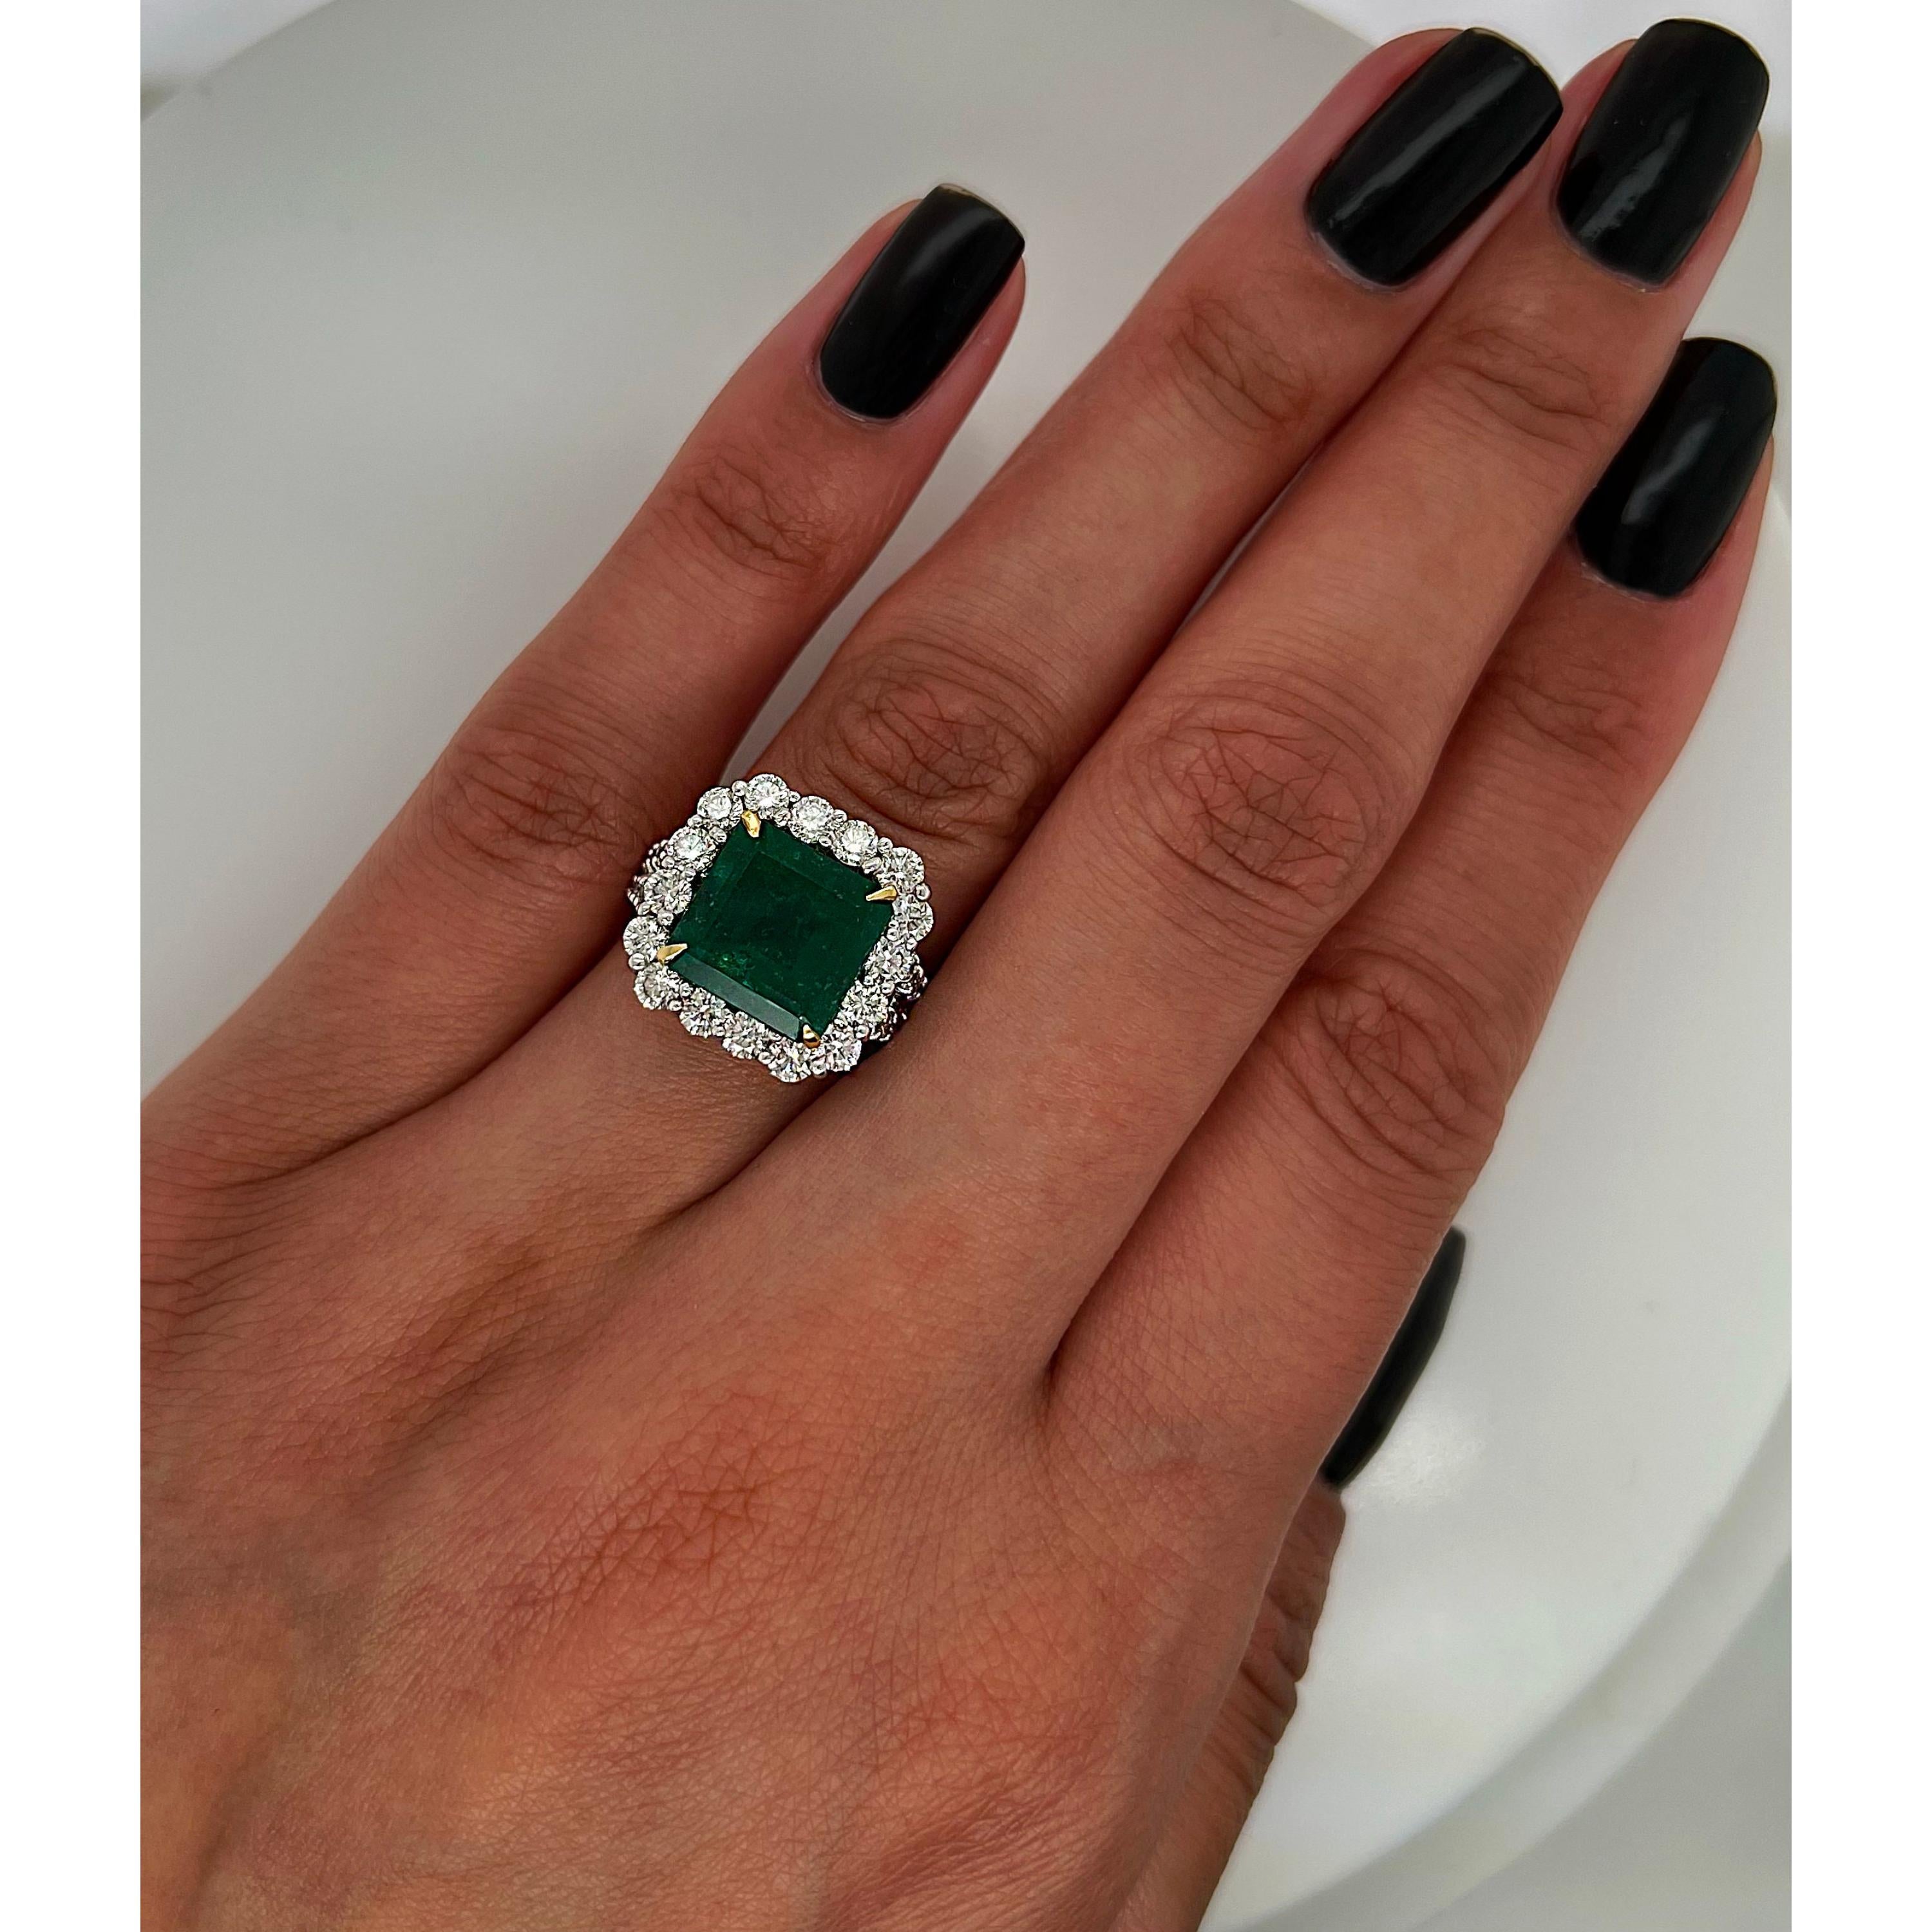 Certified 4.15 Carat Halo Natural Emerald Diamond Eternity Band Ring For Her

A stunning ring featuring IGI/GIA Certified 4.15 Carat Natural Emerald and 1.80 Carat of Diamond Accents set in 18K Solid Gold.

Emeralds are highly valued for their